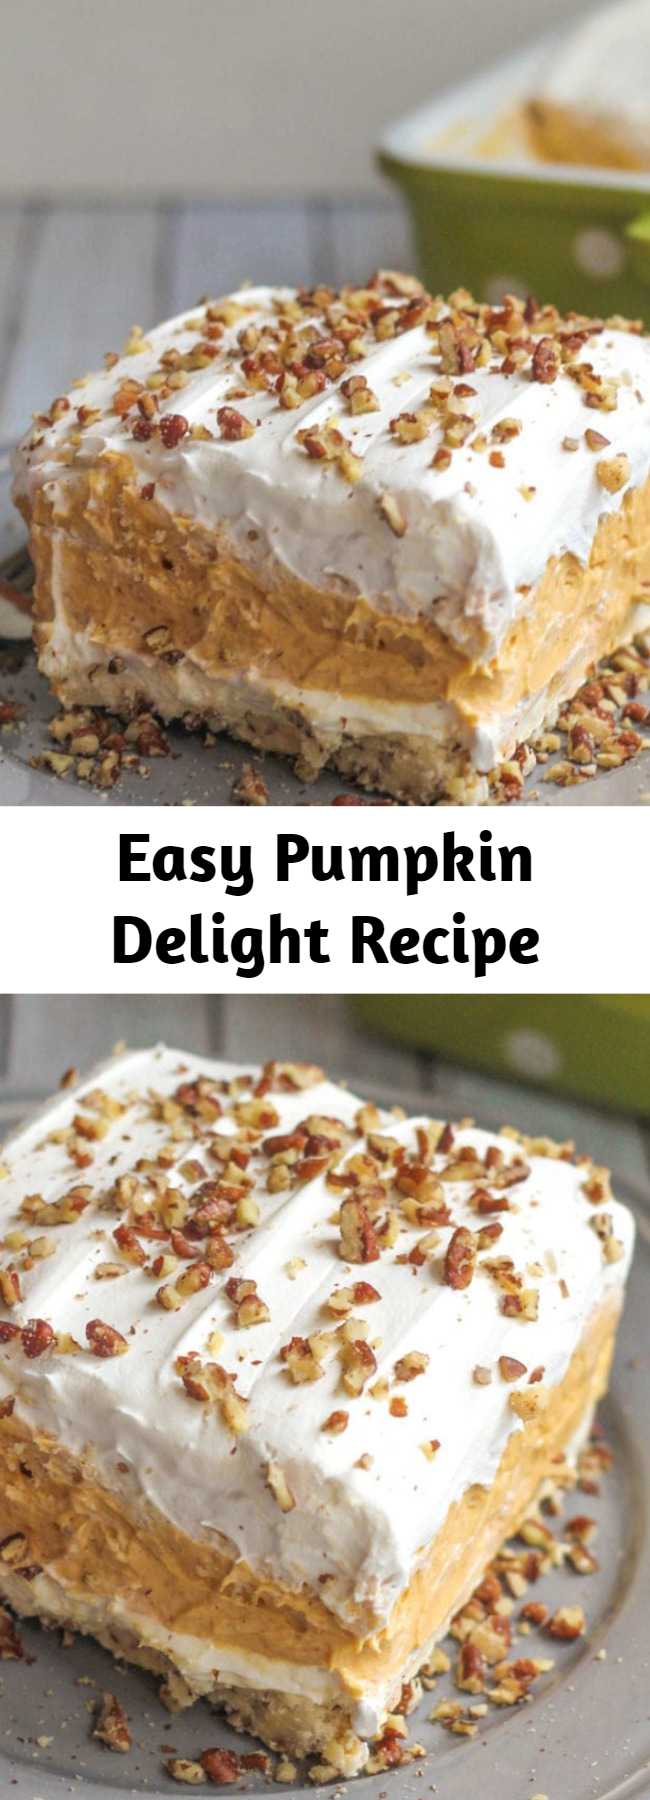 Easy Pumpkin Delight Recipe - With A Buttery Pecan Crust, A Whipped Cream Cheese Layer, Light And Fluffy Pumpkin Spice Pudding, And More Whipped Cream Topped Off With Chopped Pecans, This Pumpkin Delight Dessert Is Absolutely Irresistible! They all make great Thanksgiving desserts.